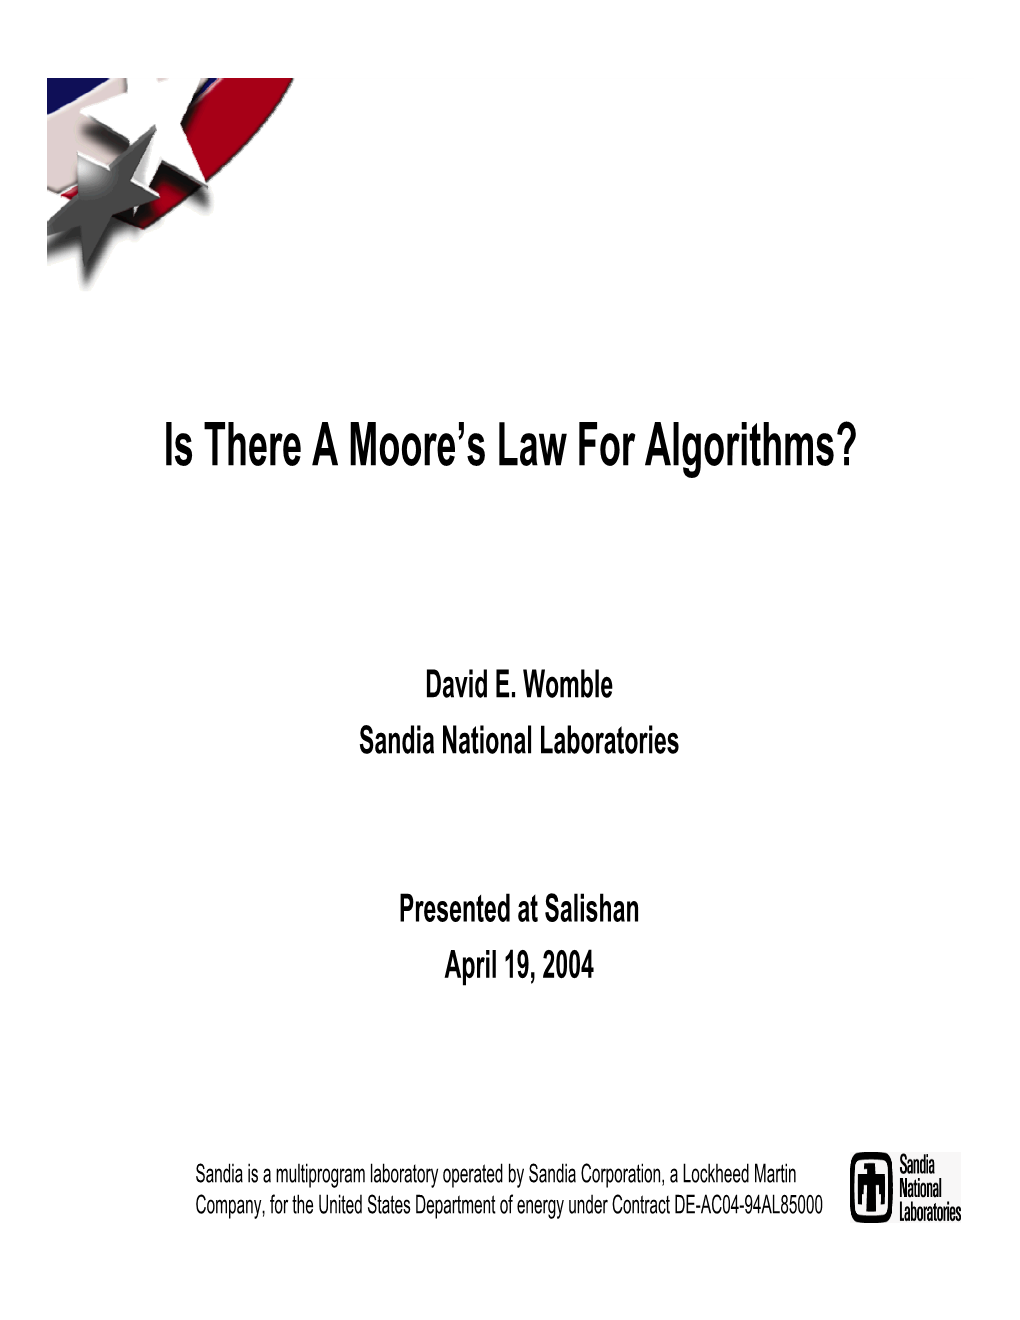 Is There a Moore's Law for Algorithms?